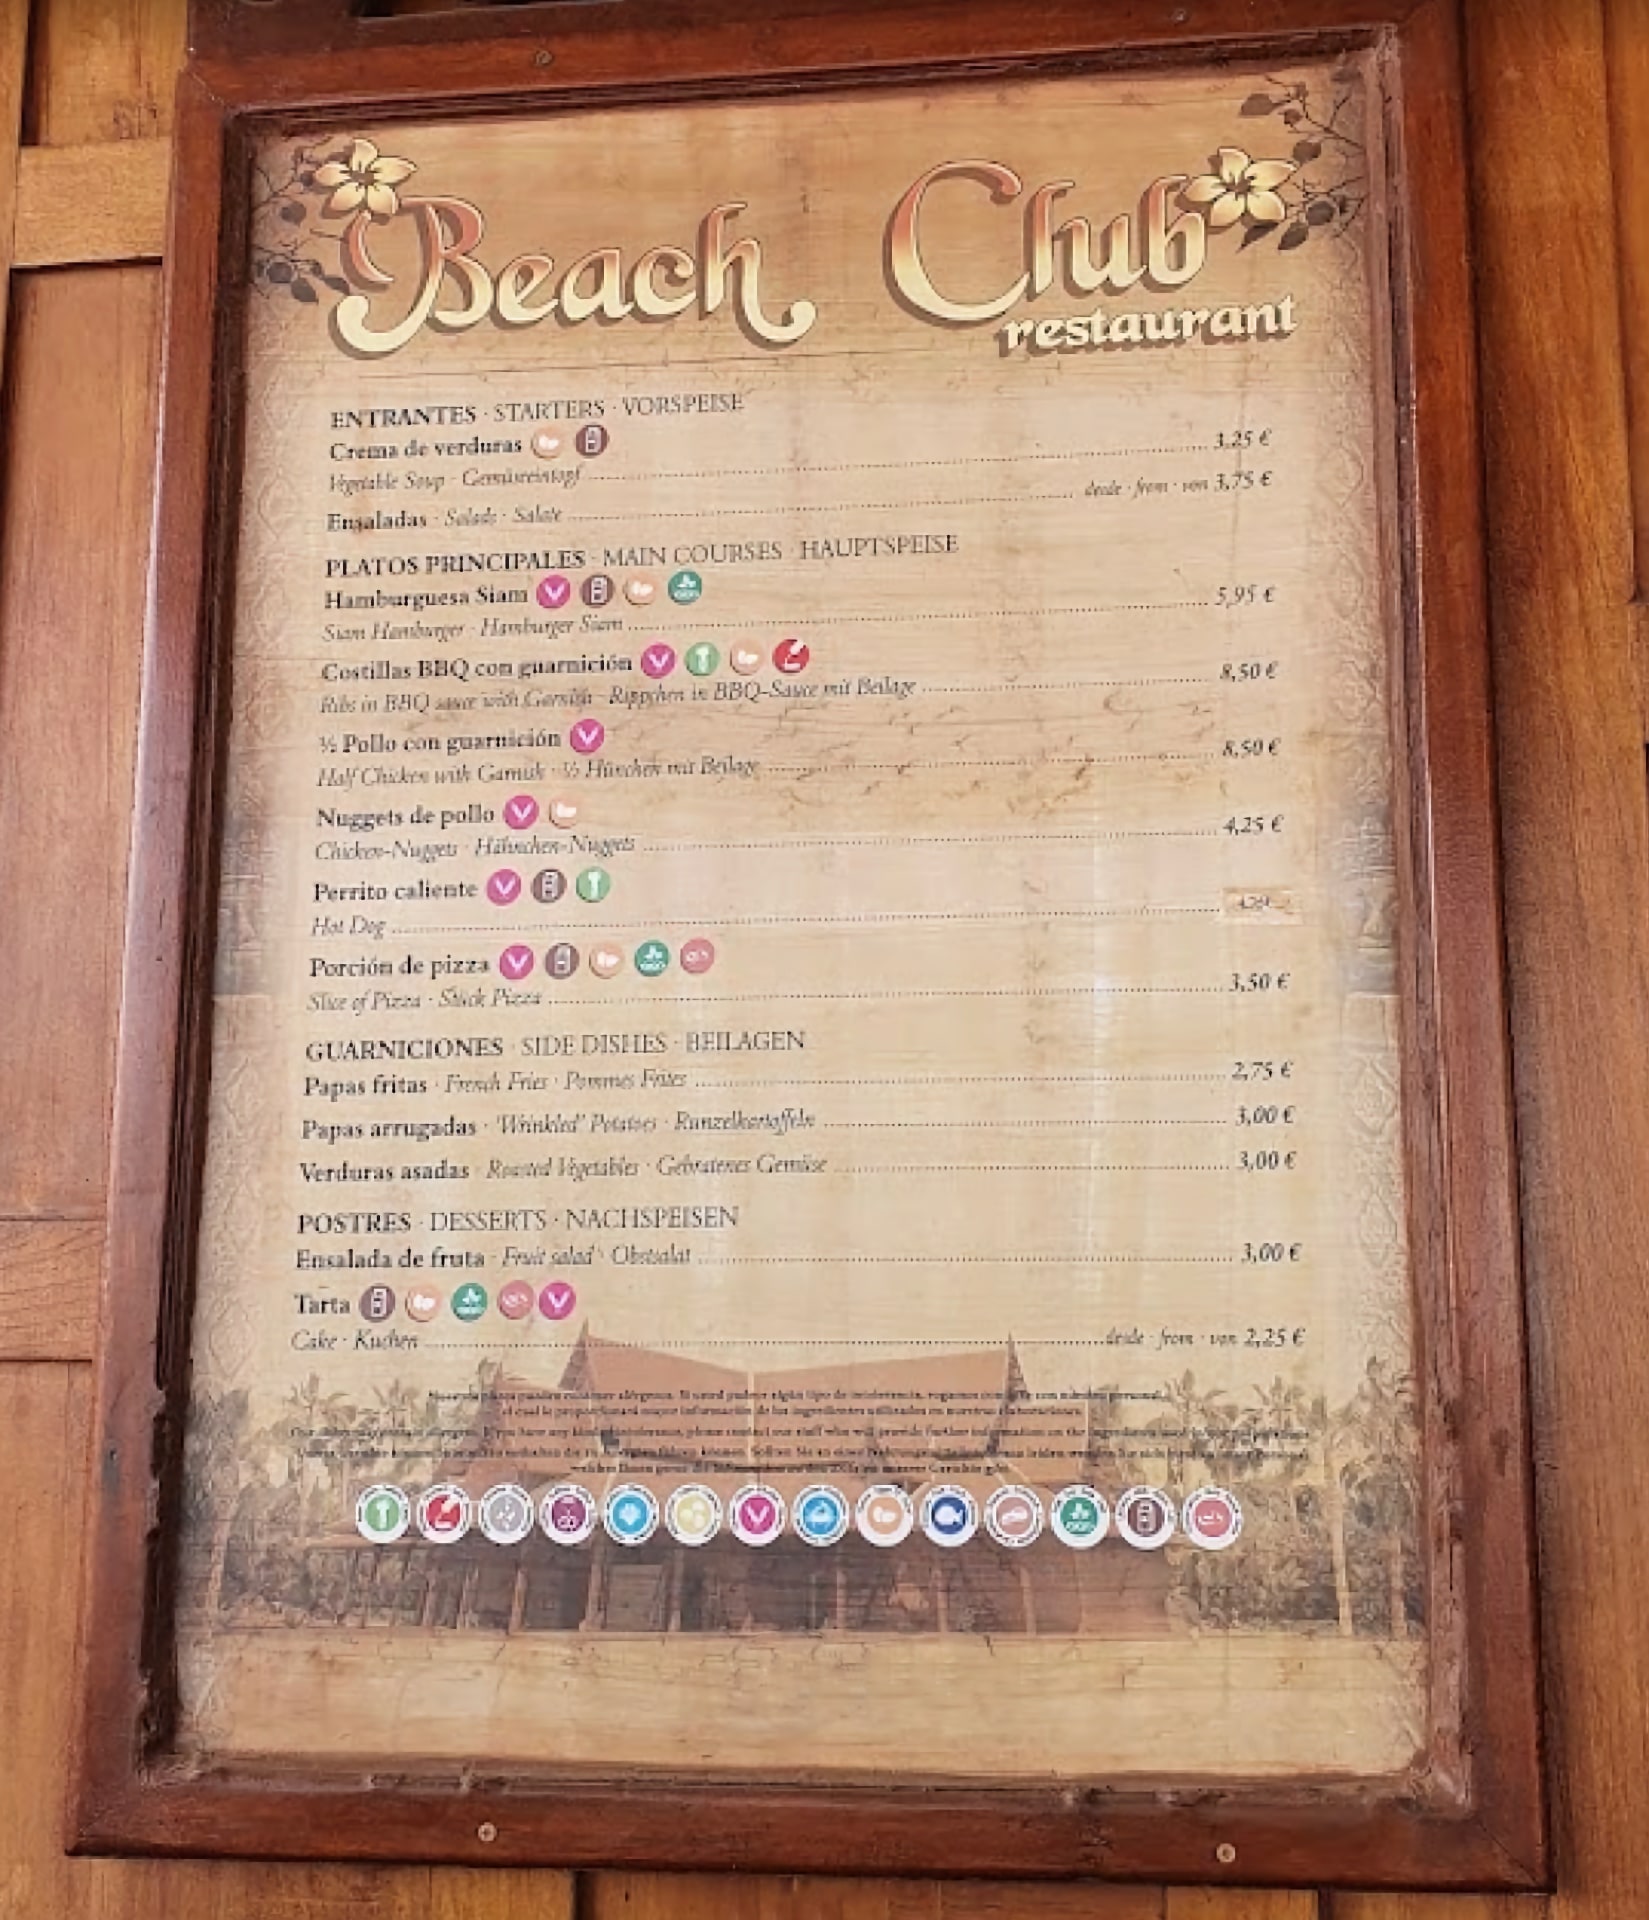 Delicious menu options at the beach club in Siam Park, Tenerife, offering a wide range of delectable dishes and drinks